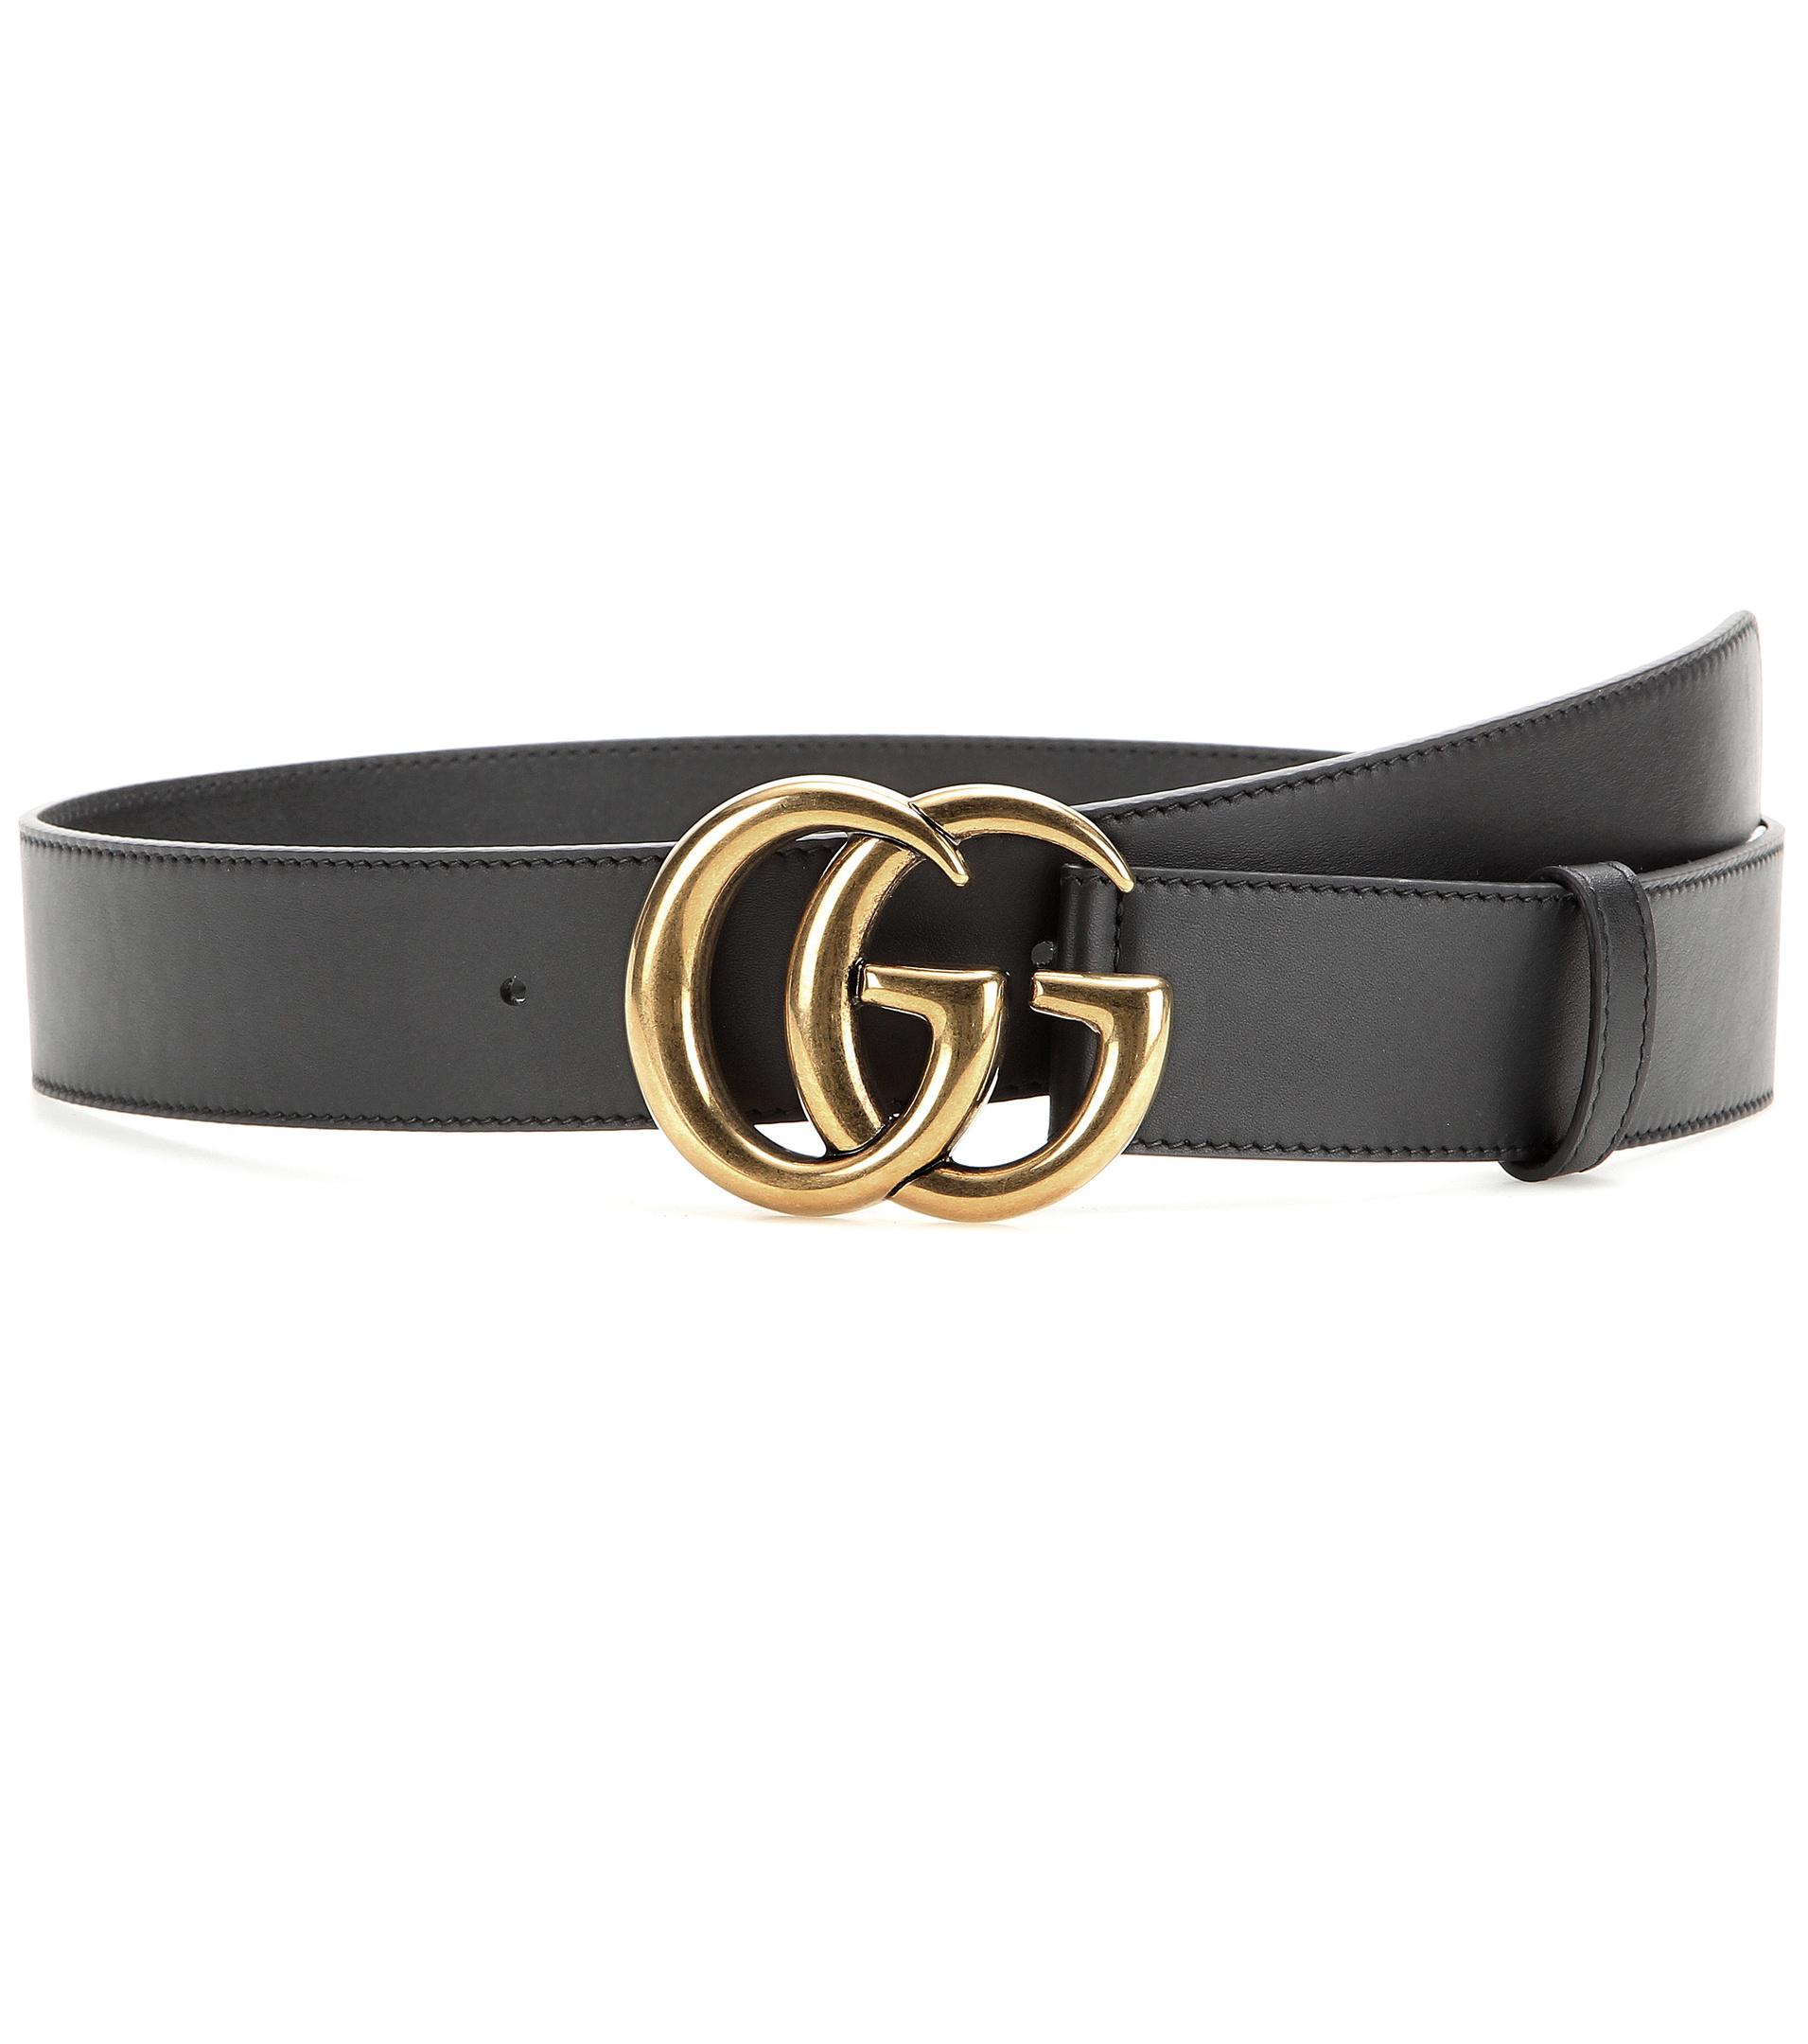 Gucci Leather Double G Snake Buckle Belt in Black for Men - Save 77% - Lyst